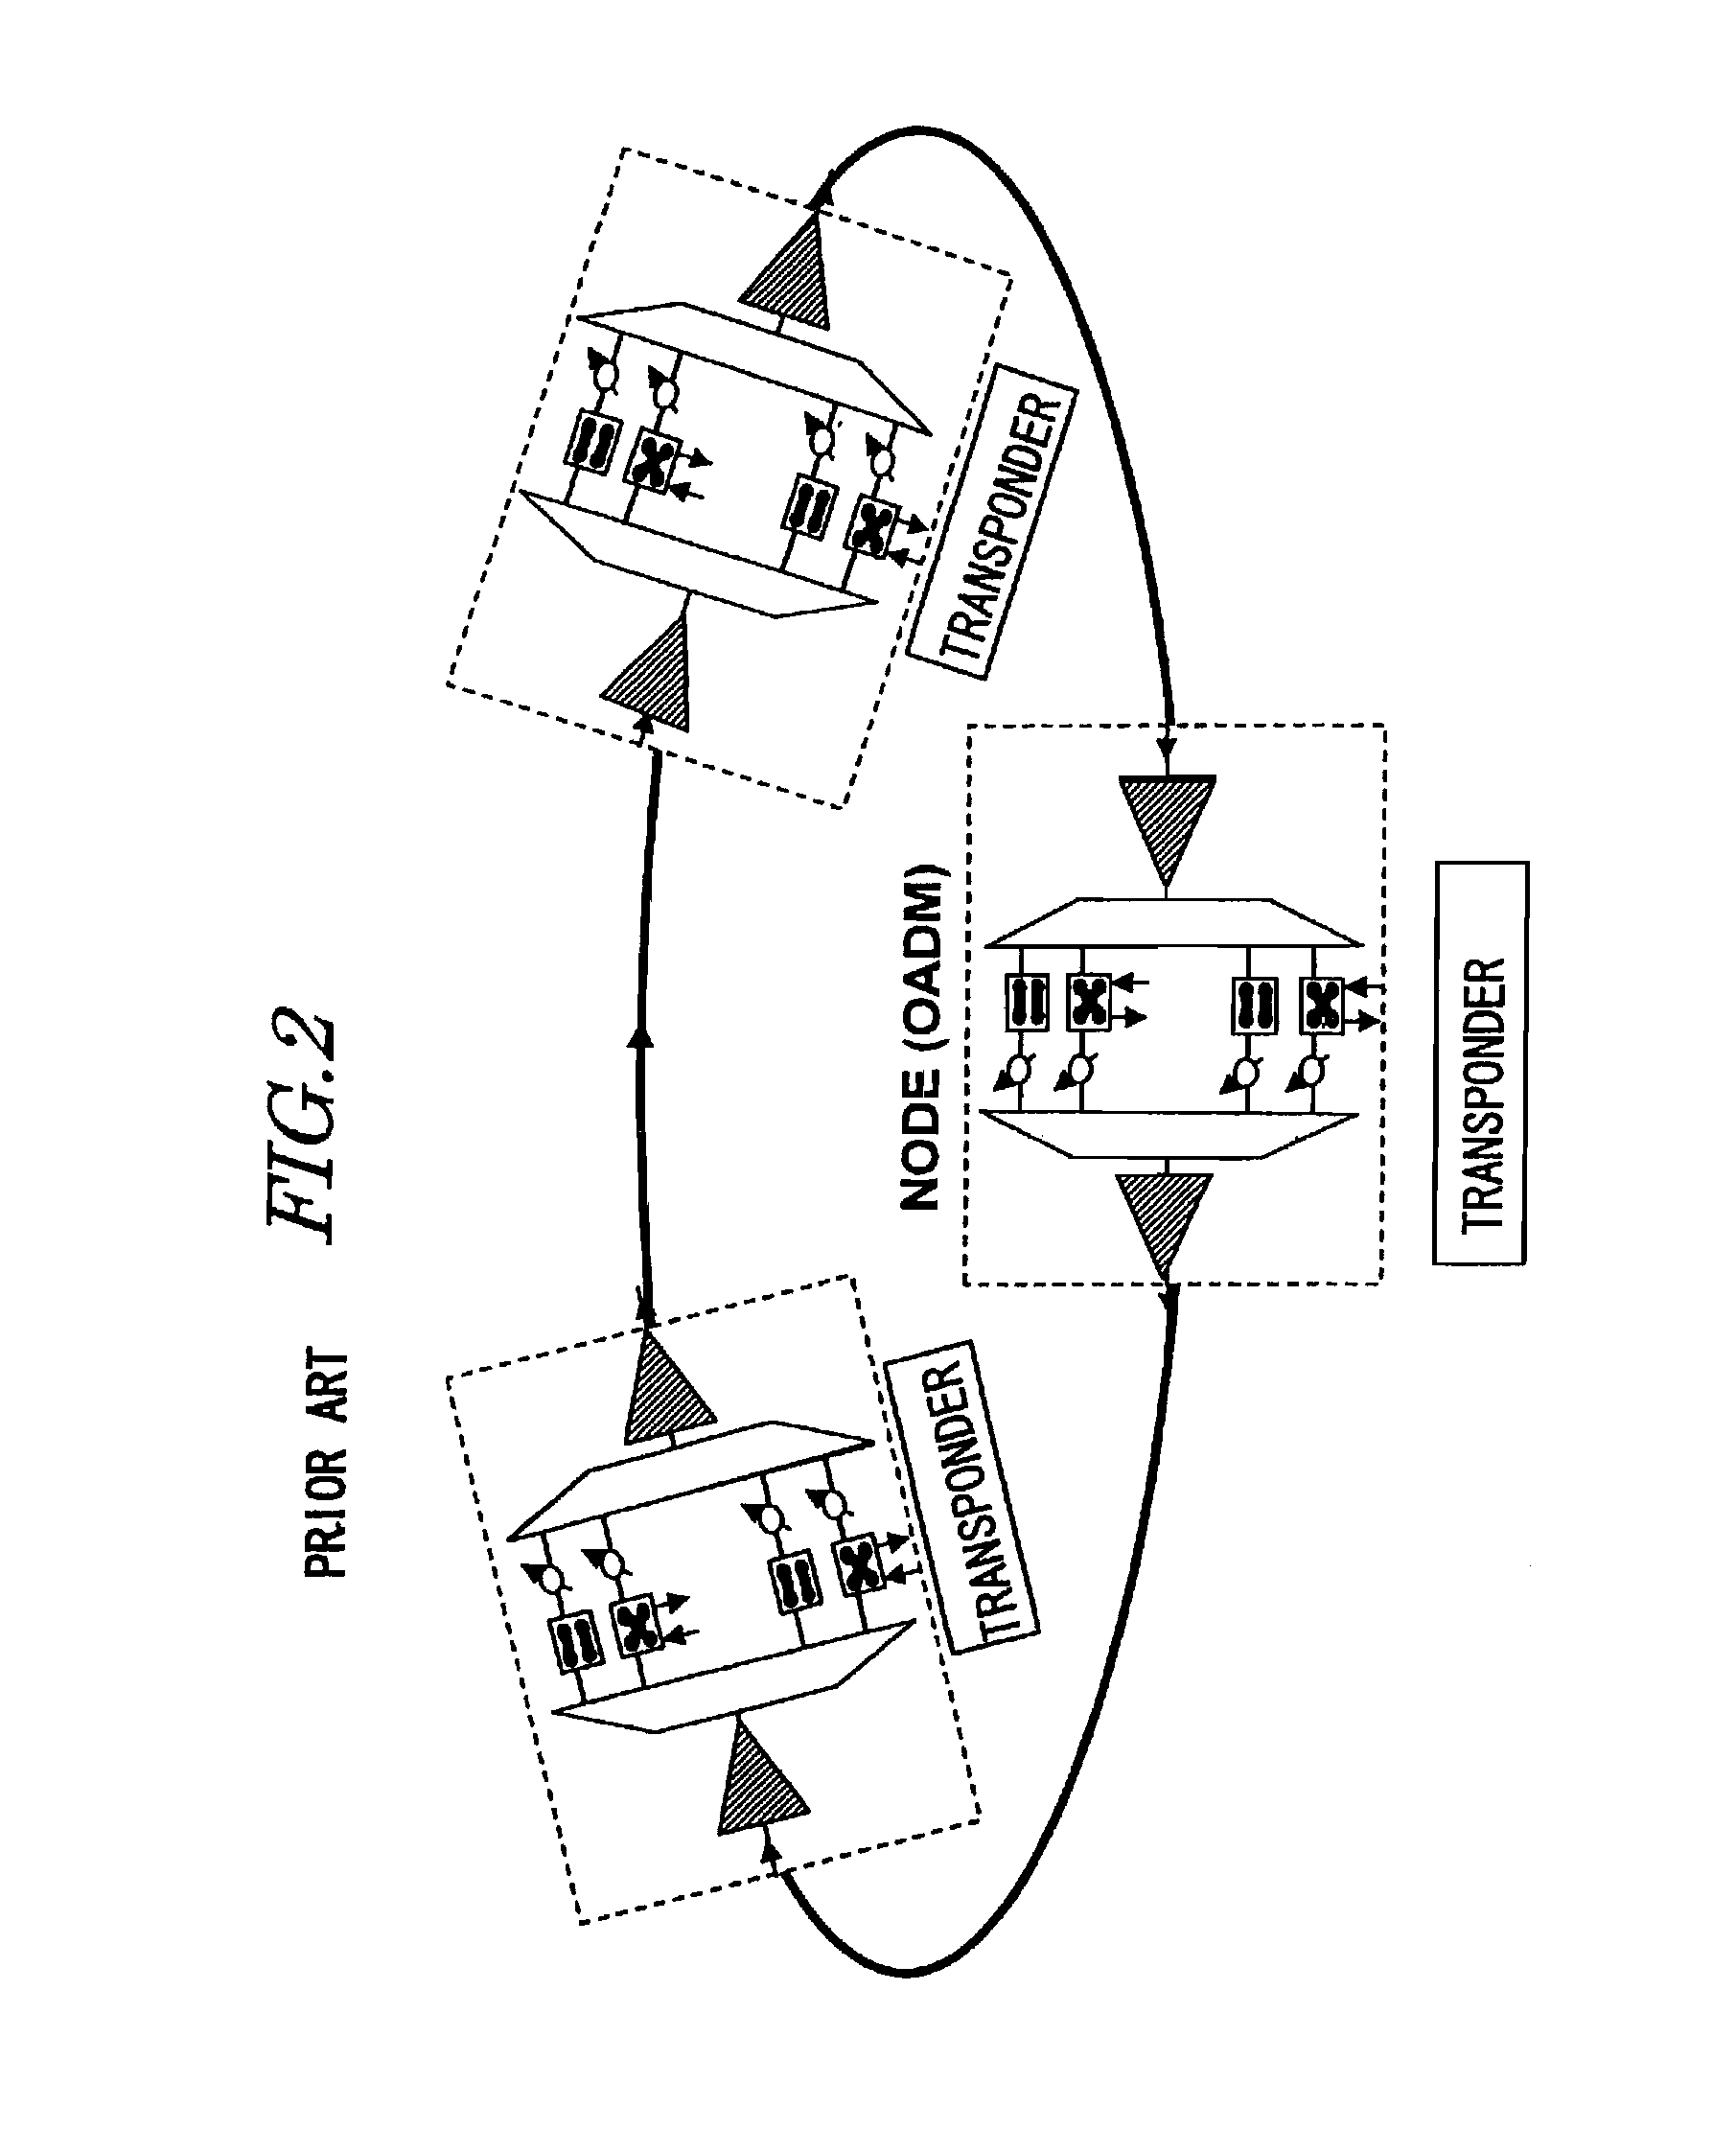 Optical network and optical add/drop apparatus